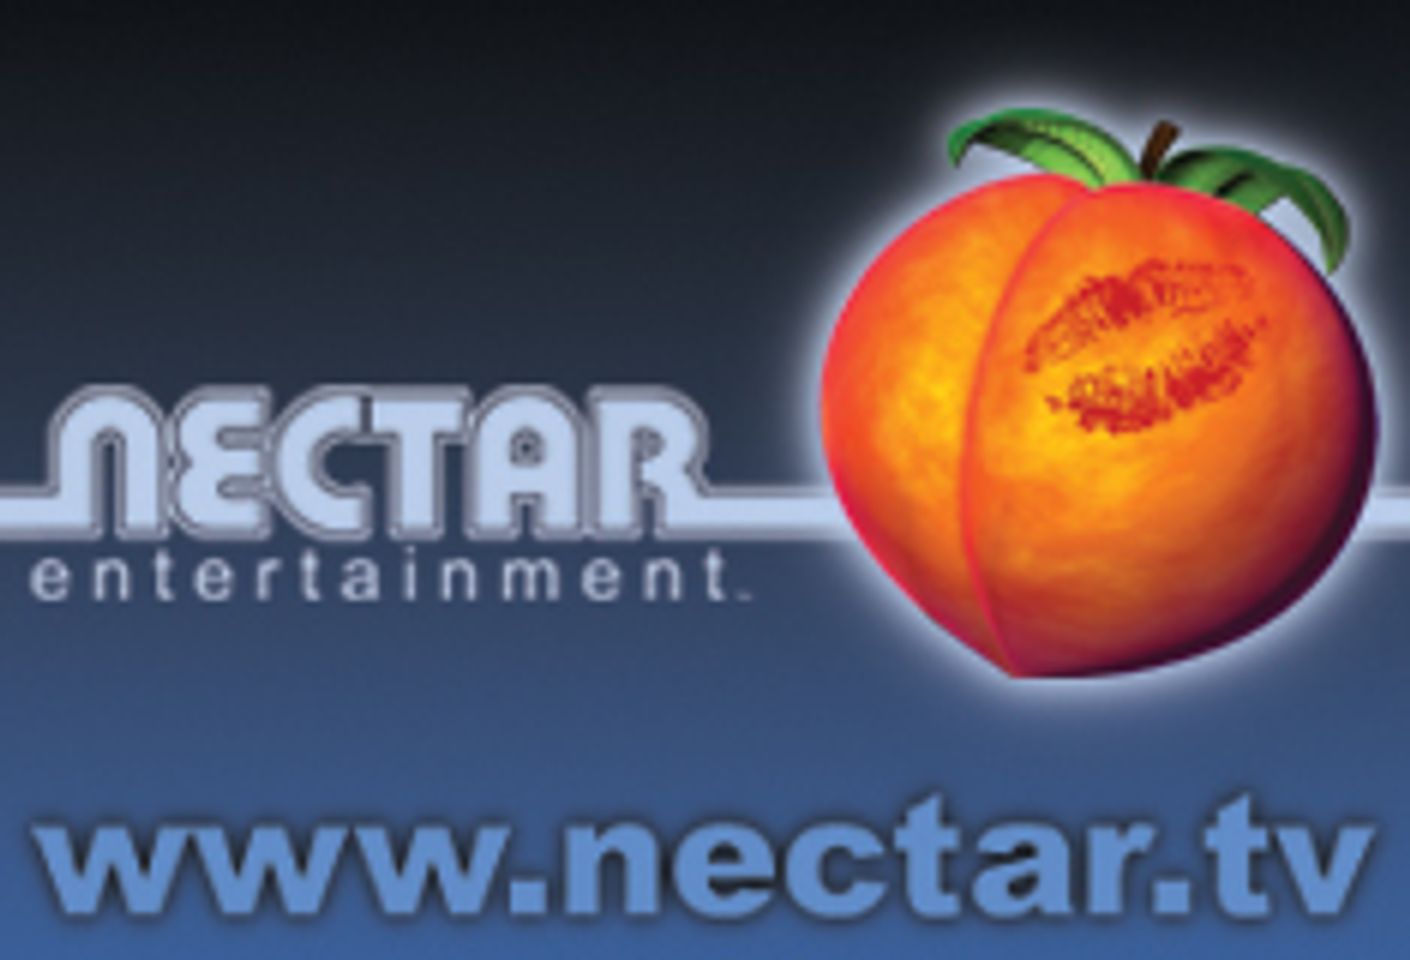 Nectar Entertainment Releases First Video